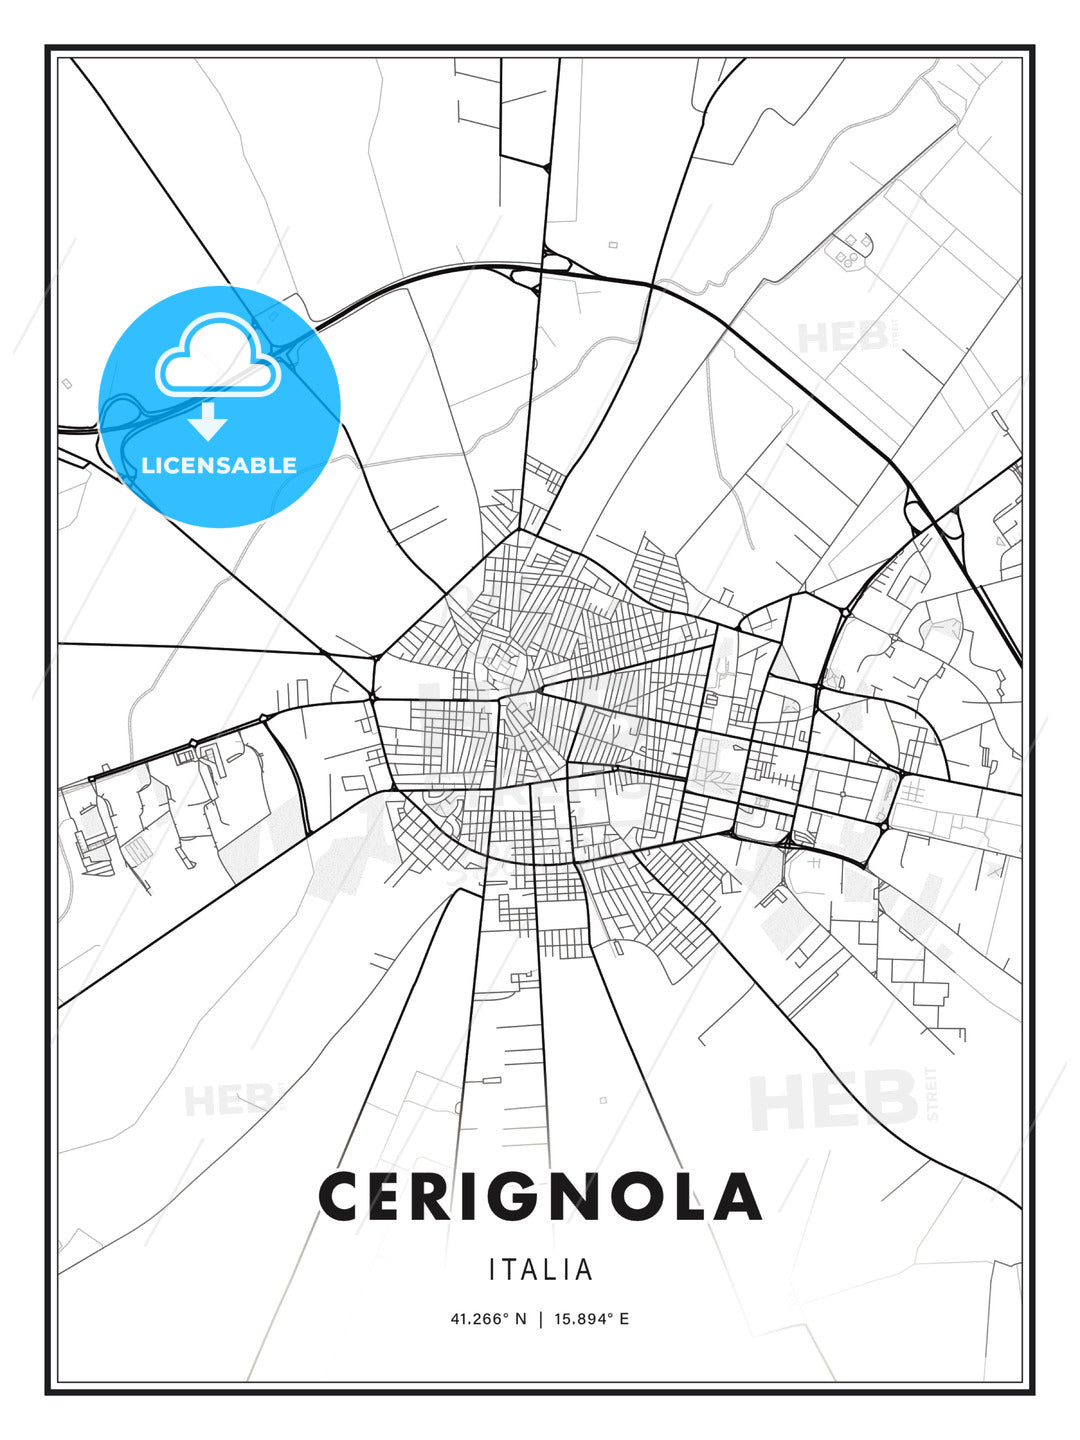 Cerignola, Italy, Modern Print Template in Various Formats - HEBSTREITS Sketches